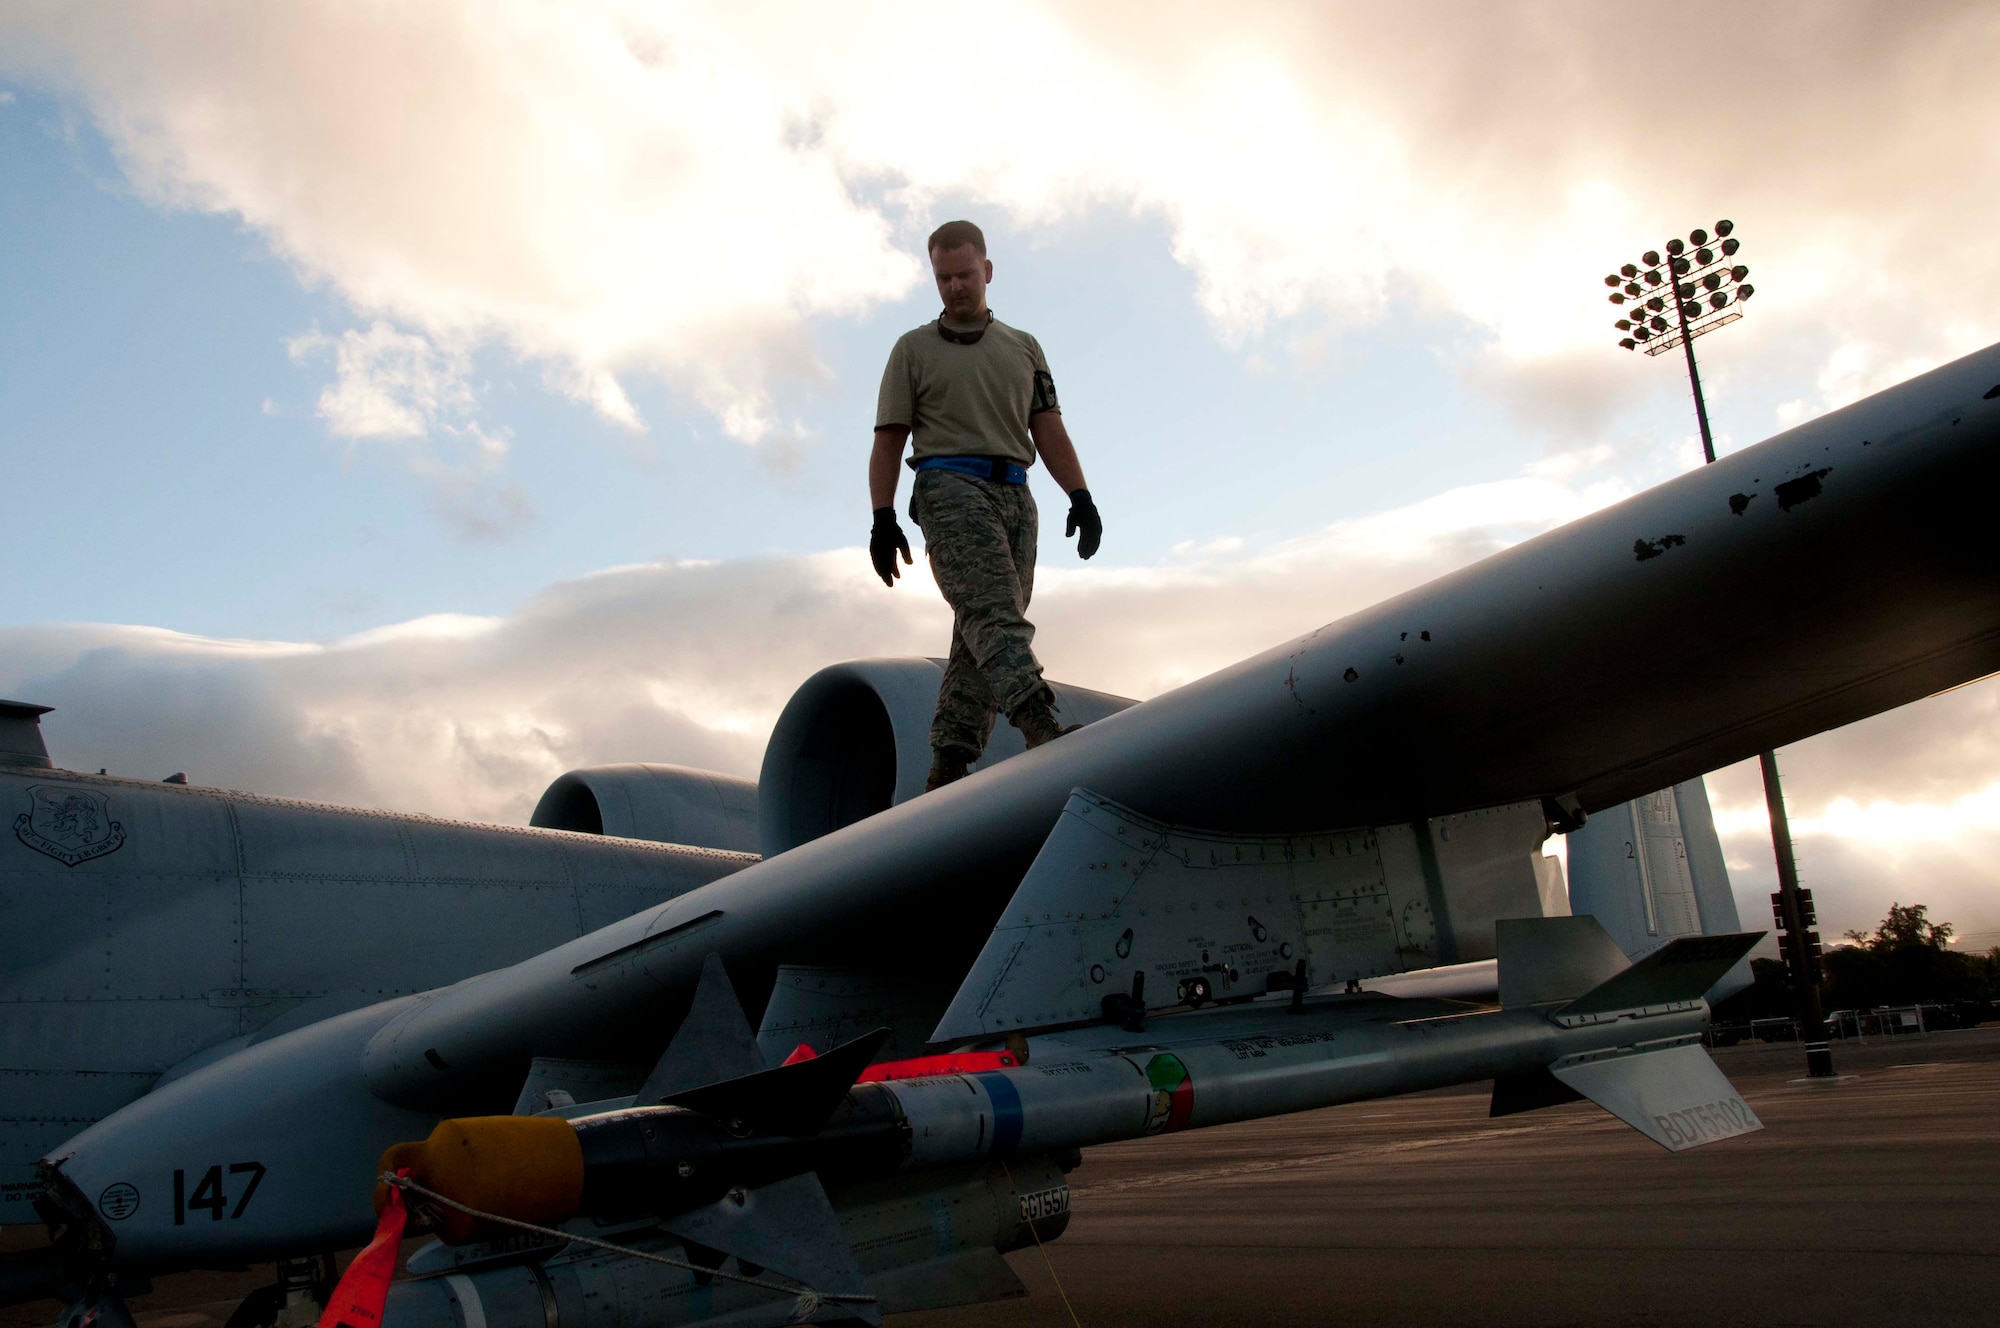 U.S. Air Force Staff Sgt. Justin Browning, 917th Maintenance Squadron crew chief, conducts a pre-flight inspection of an A-10 Thunderbolt II in preparation for a sortie during the Rim of the Pacific military exercise at Joint Base Pearl Harbor-Hickam, Hawaii, July 17, 2012.  Twenty-two nations, more than 40 ships and submarines, more than 200 aircraft and 25,000 personnel are participating in RIMPAC exercise from June 29 to Aug. 3, in and around the Hawaiian Islands. The world's largest international maritime exercise, RIMPAC provides a unique training opportunity that helps participants foster and sustain the cooperative relationships that are critical to ensuring the safety of sea lanes and security on the world's oceans. RIMPAC 2012 is the 23rd exercise in the series that began in 1971. (U.S. Air Force photo by Staff Sgt. Ted Daigle)